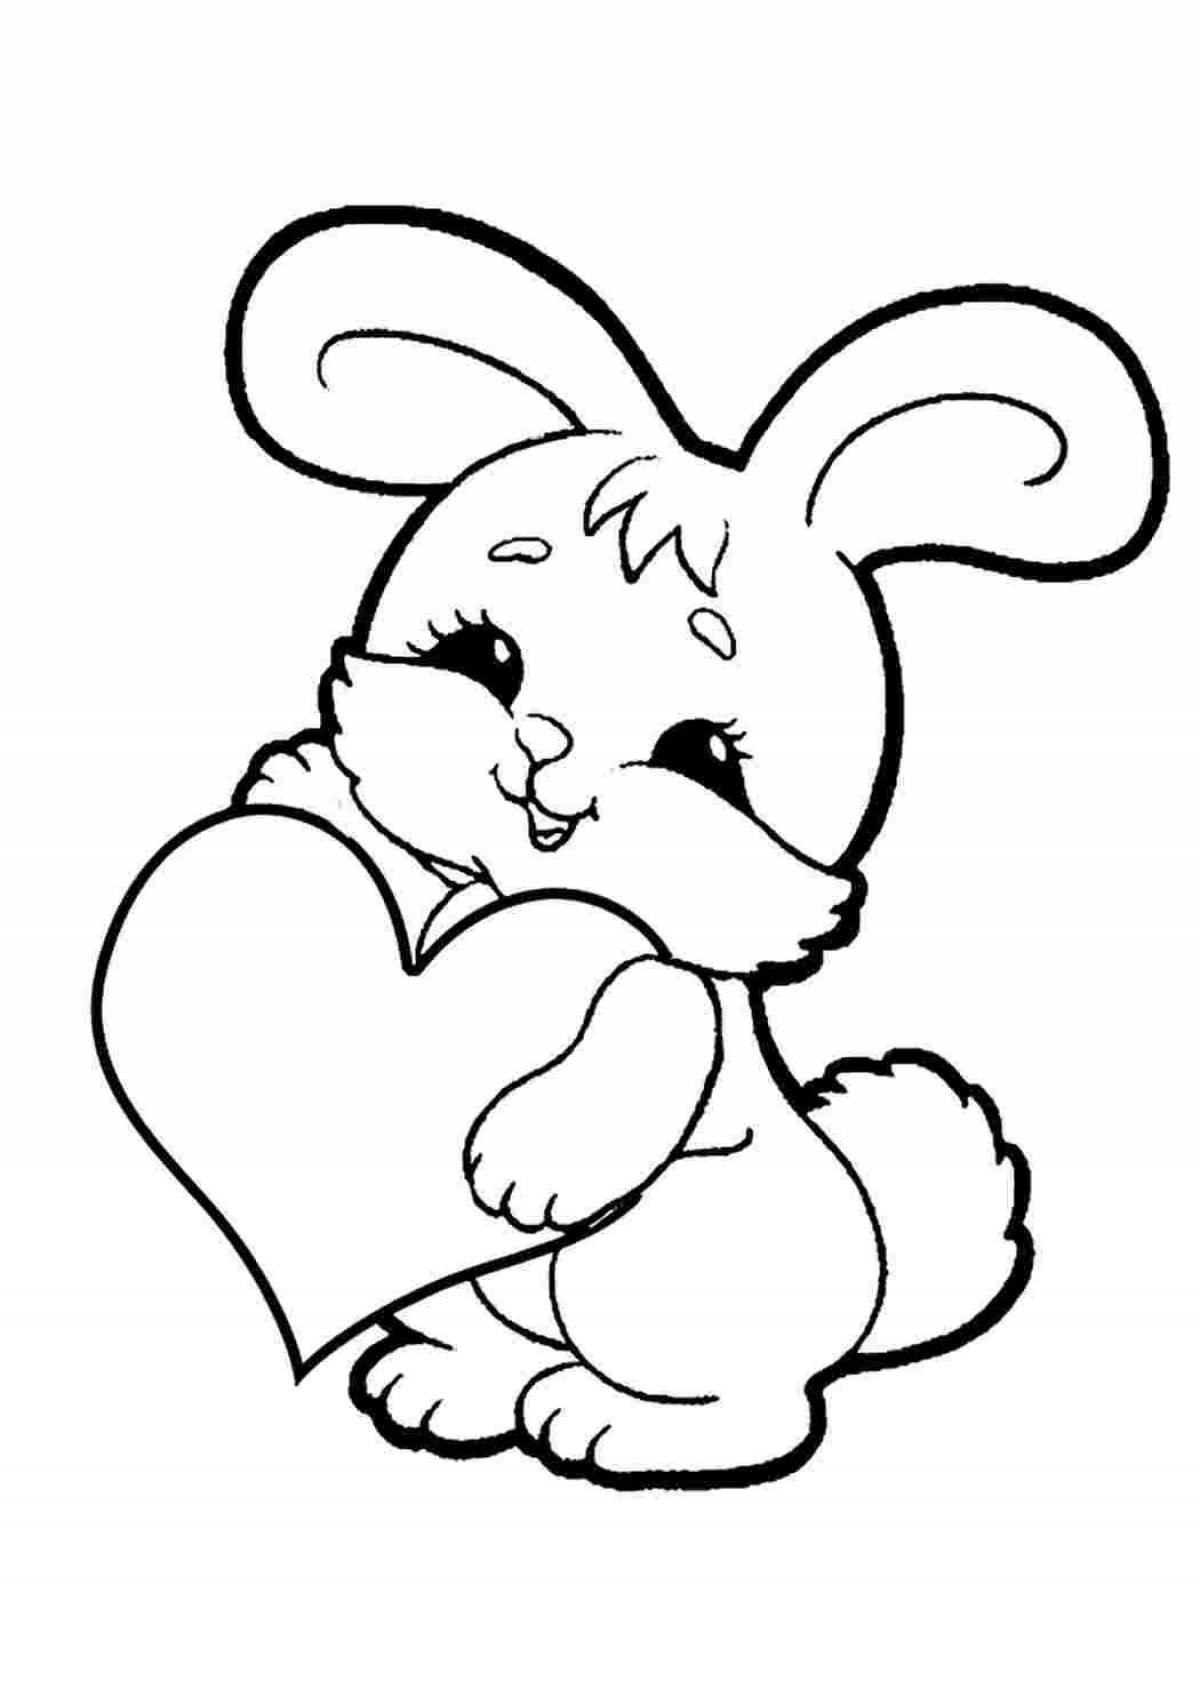 Adorable bunny coloring book with a bow